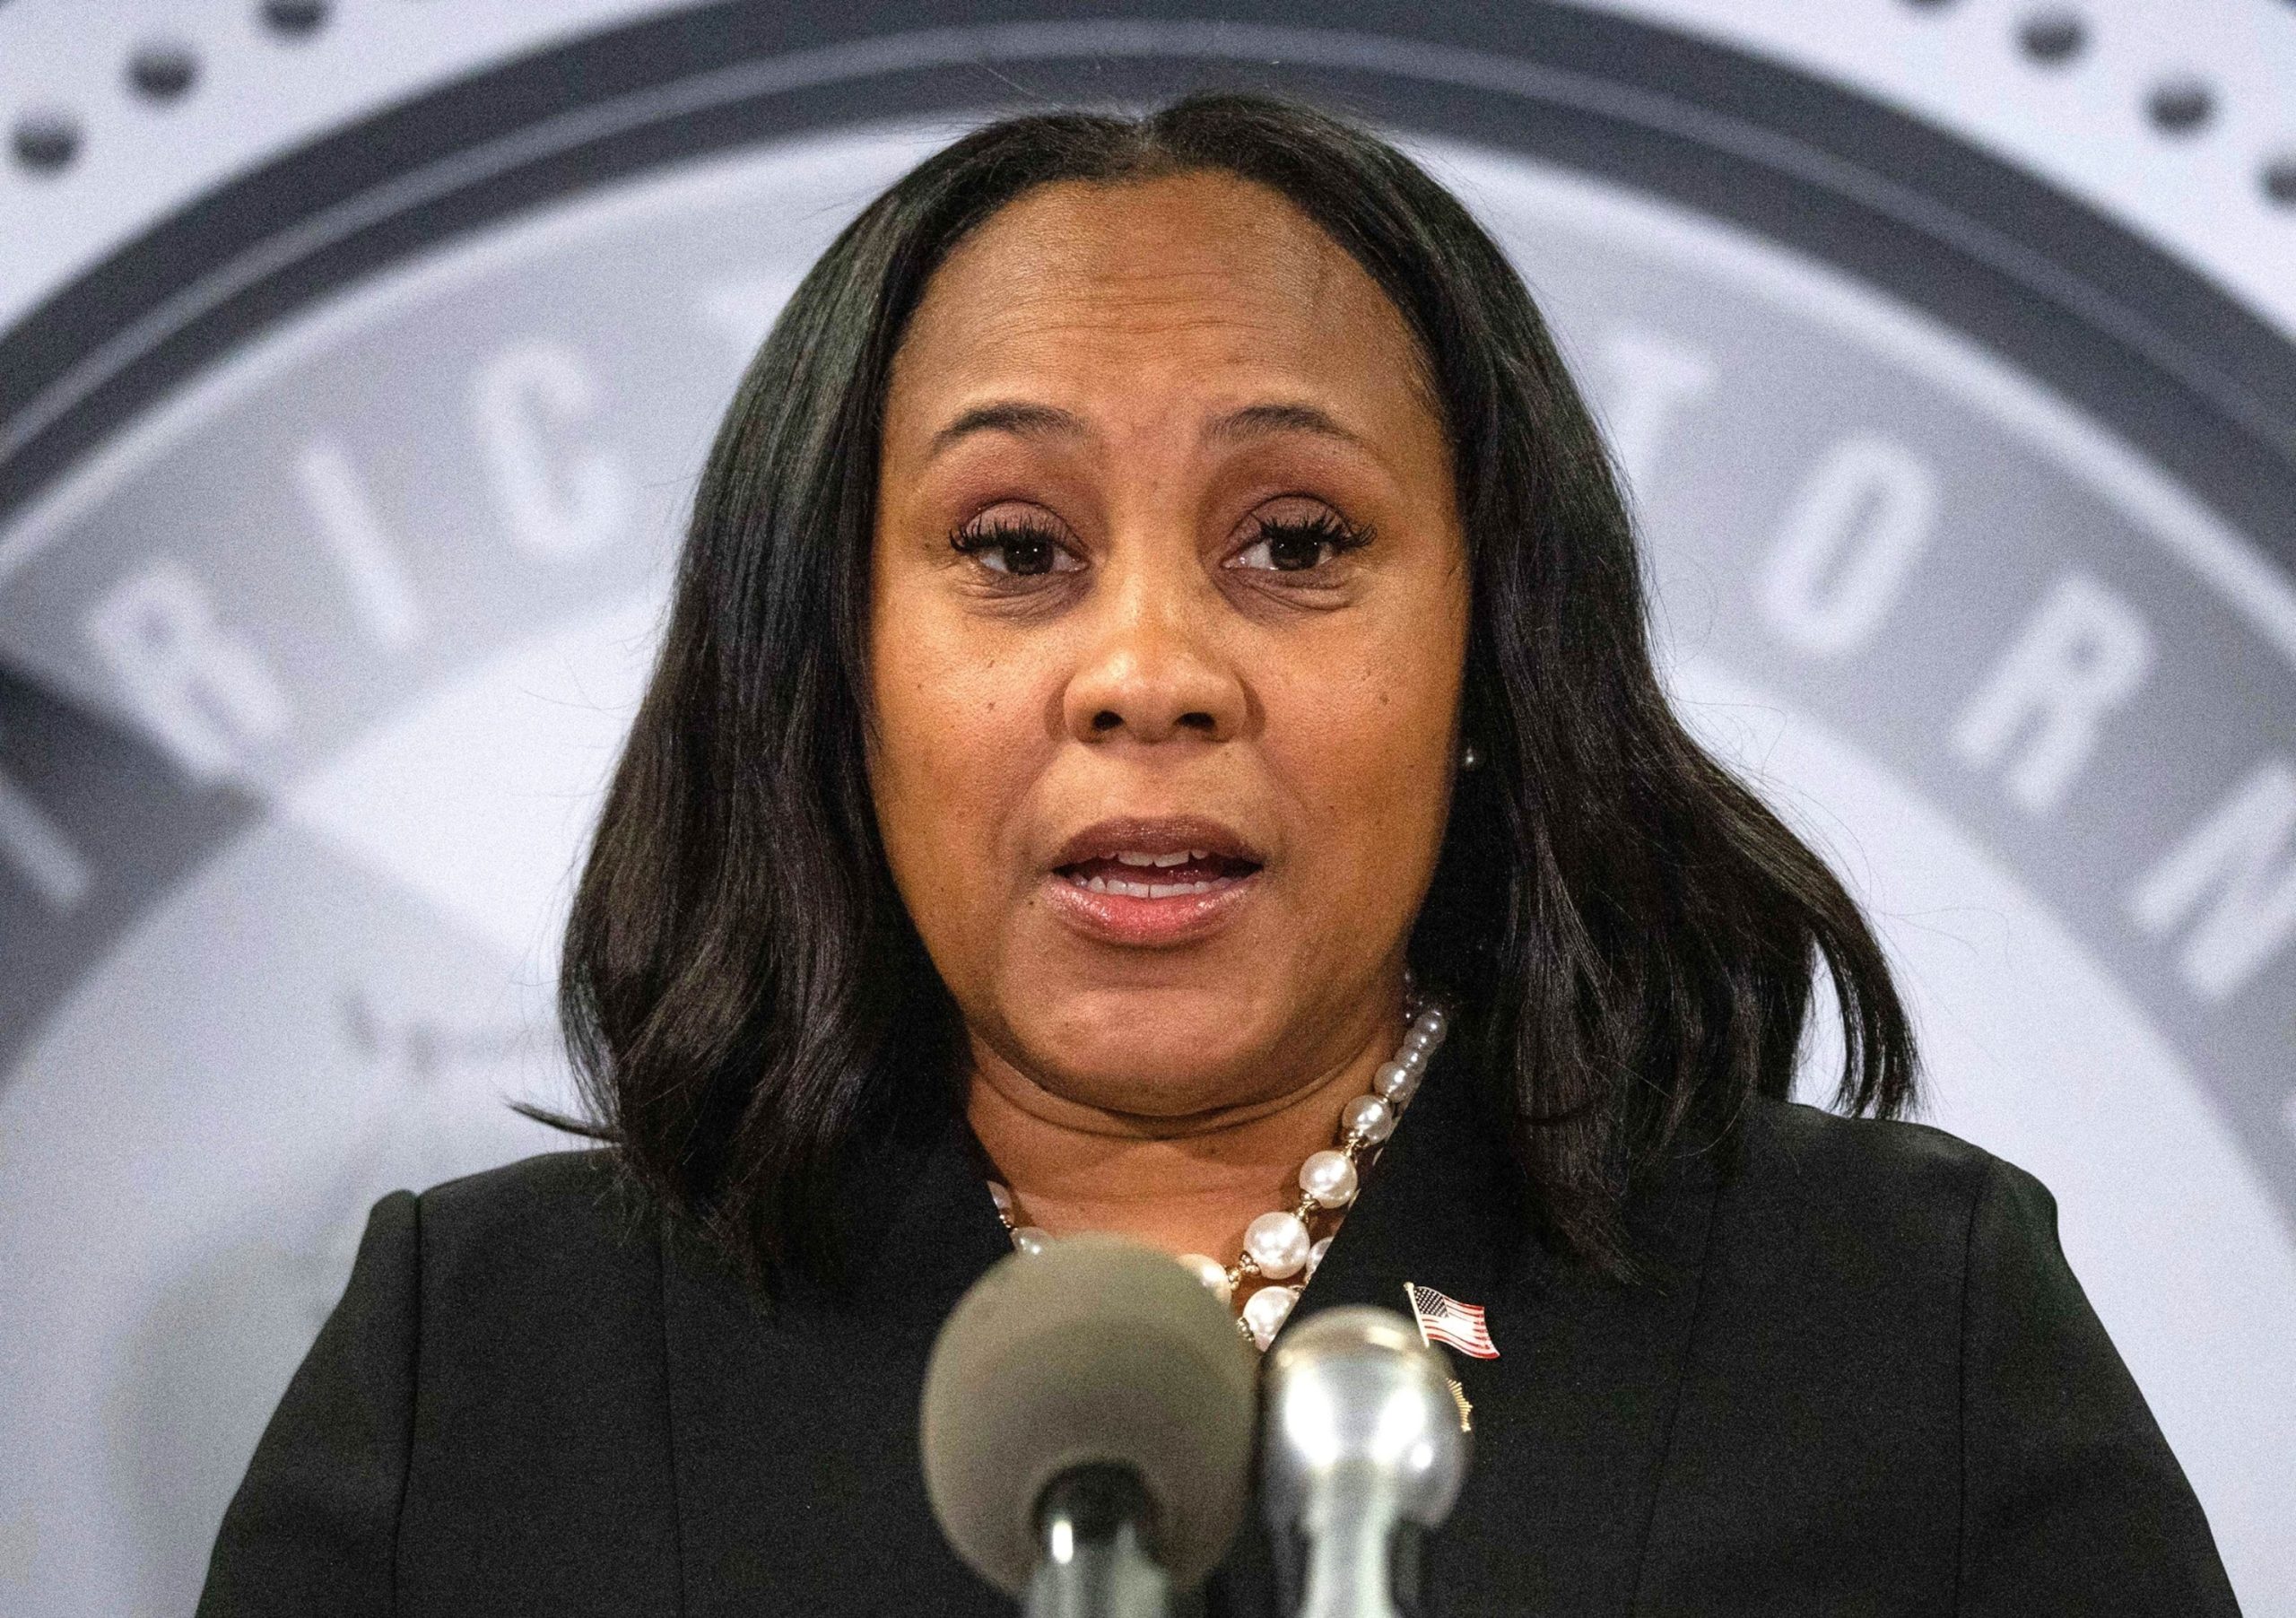 Bank records reveal that Fulton County District Attorney Fani Willis embarked on trips alongside her chief prosecutor, according to a recent filing.